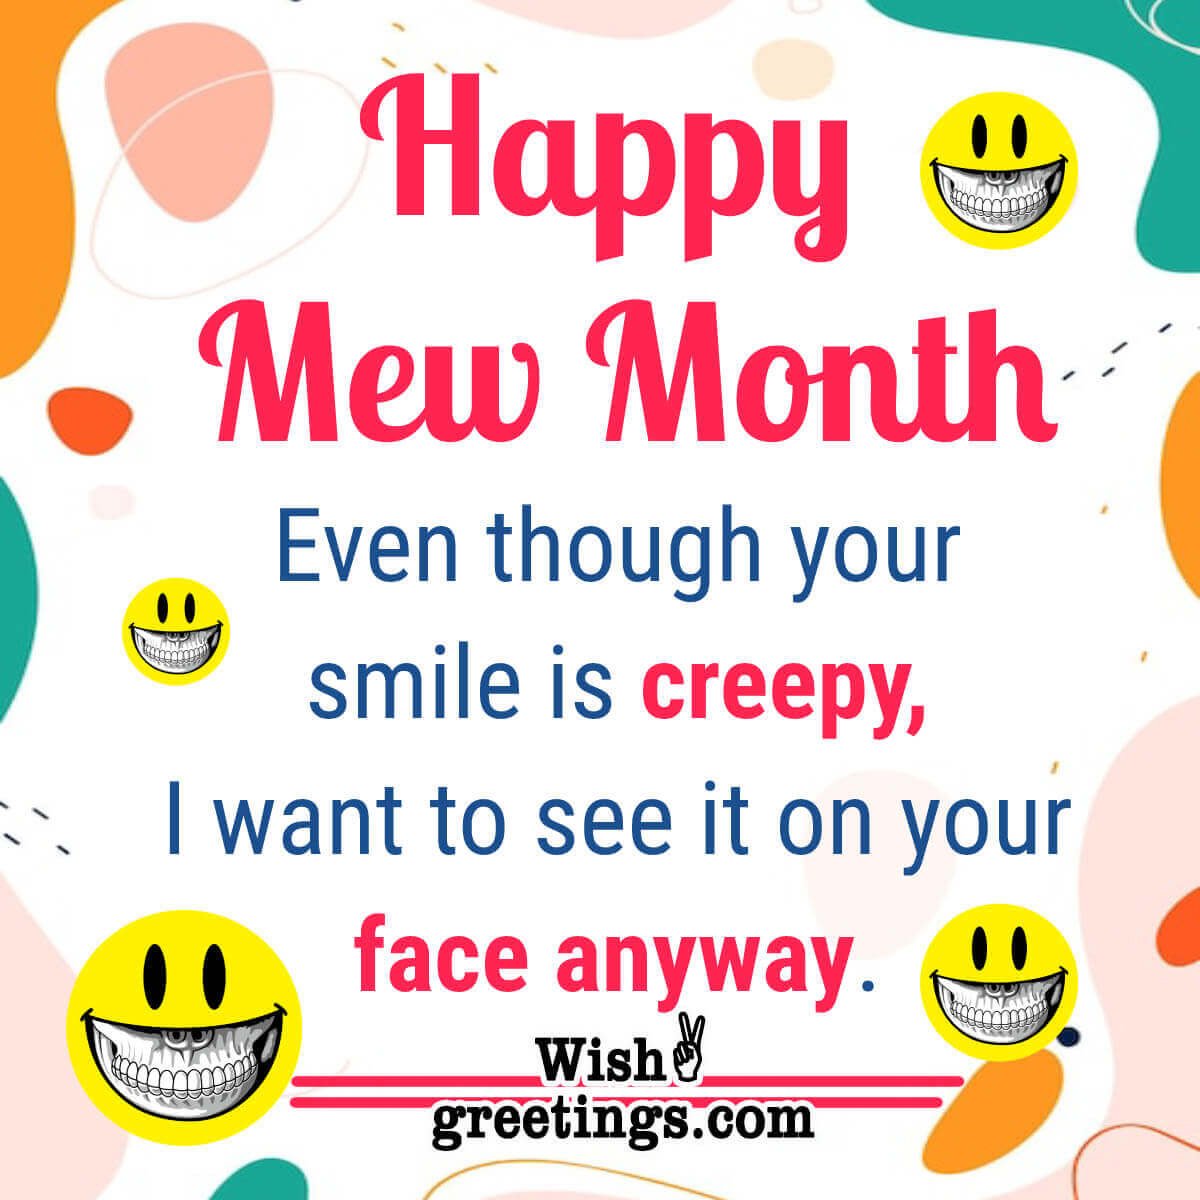 Happy New Month Funny Message Pic